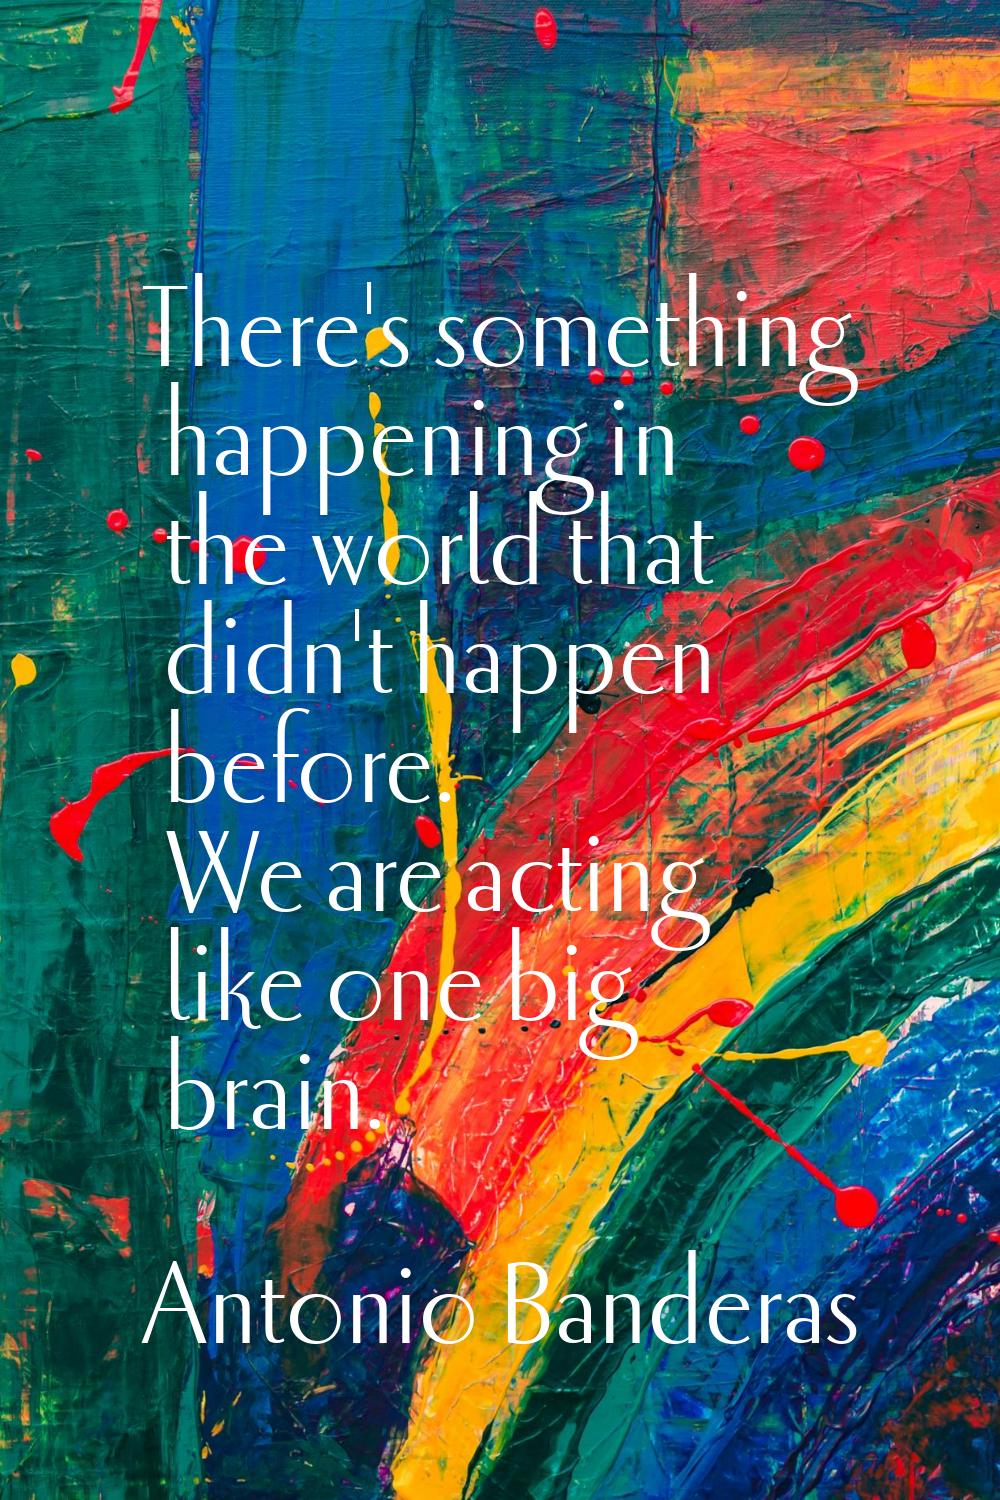 There's something happening in the world that didn't happen before. We are acting like one big brai